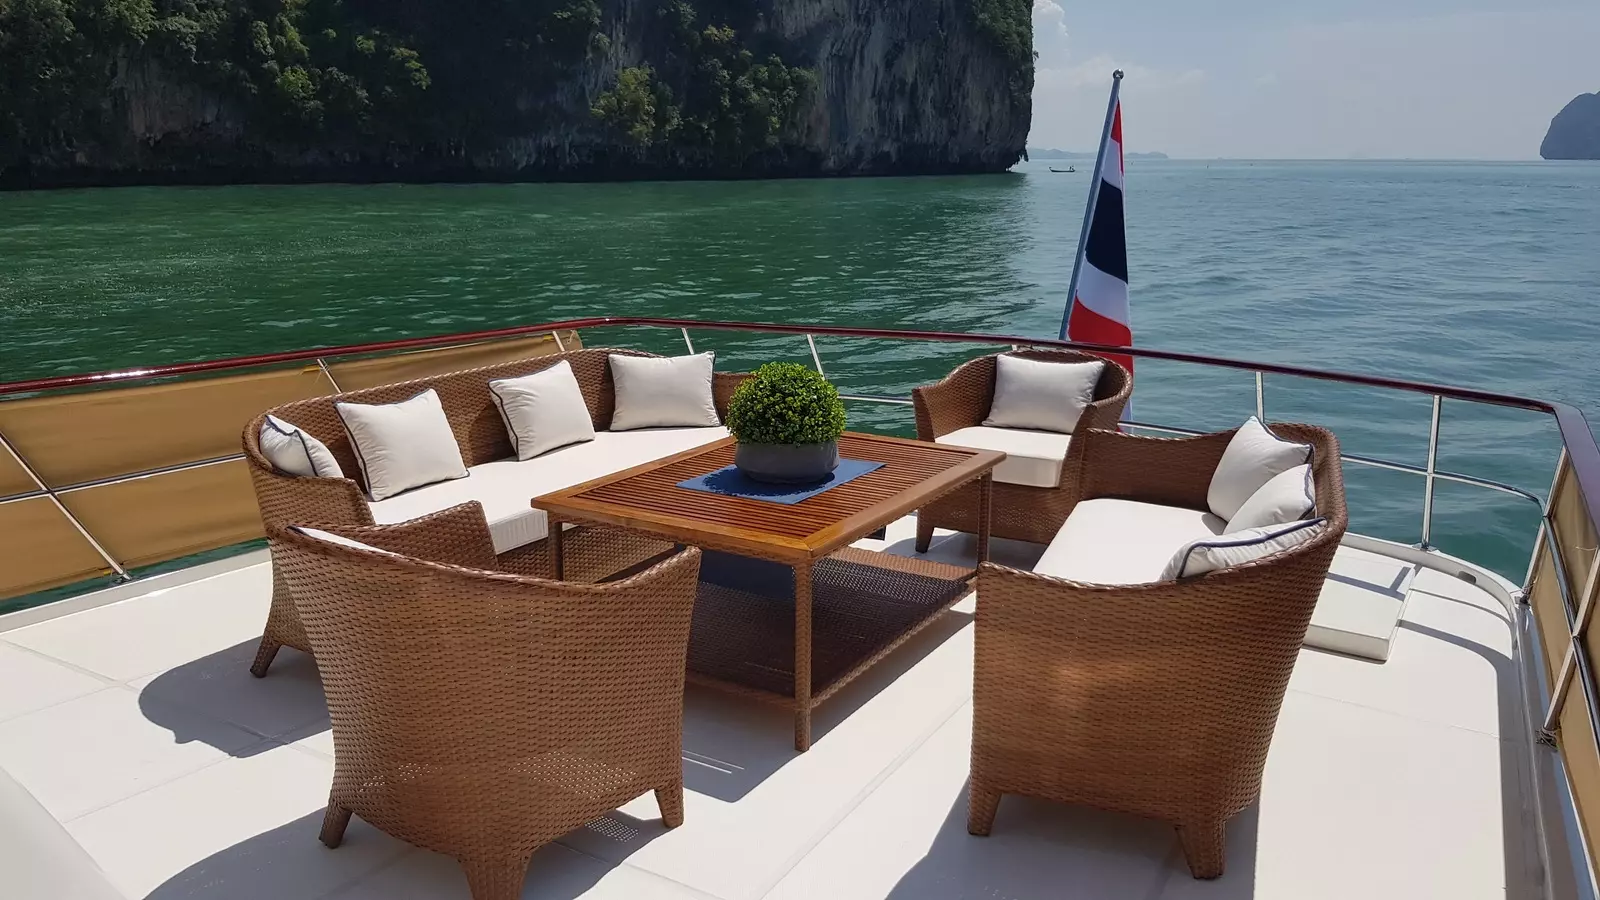 Sea Princess by Defever - Top rates for a Charter of a private Motor Yacht in Thailand